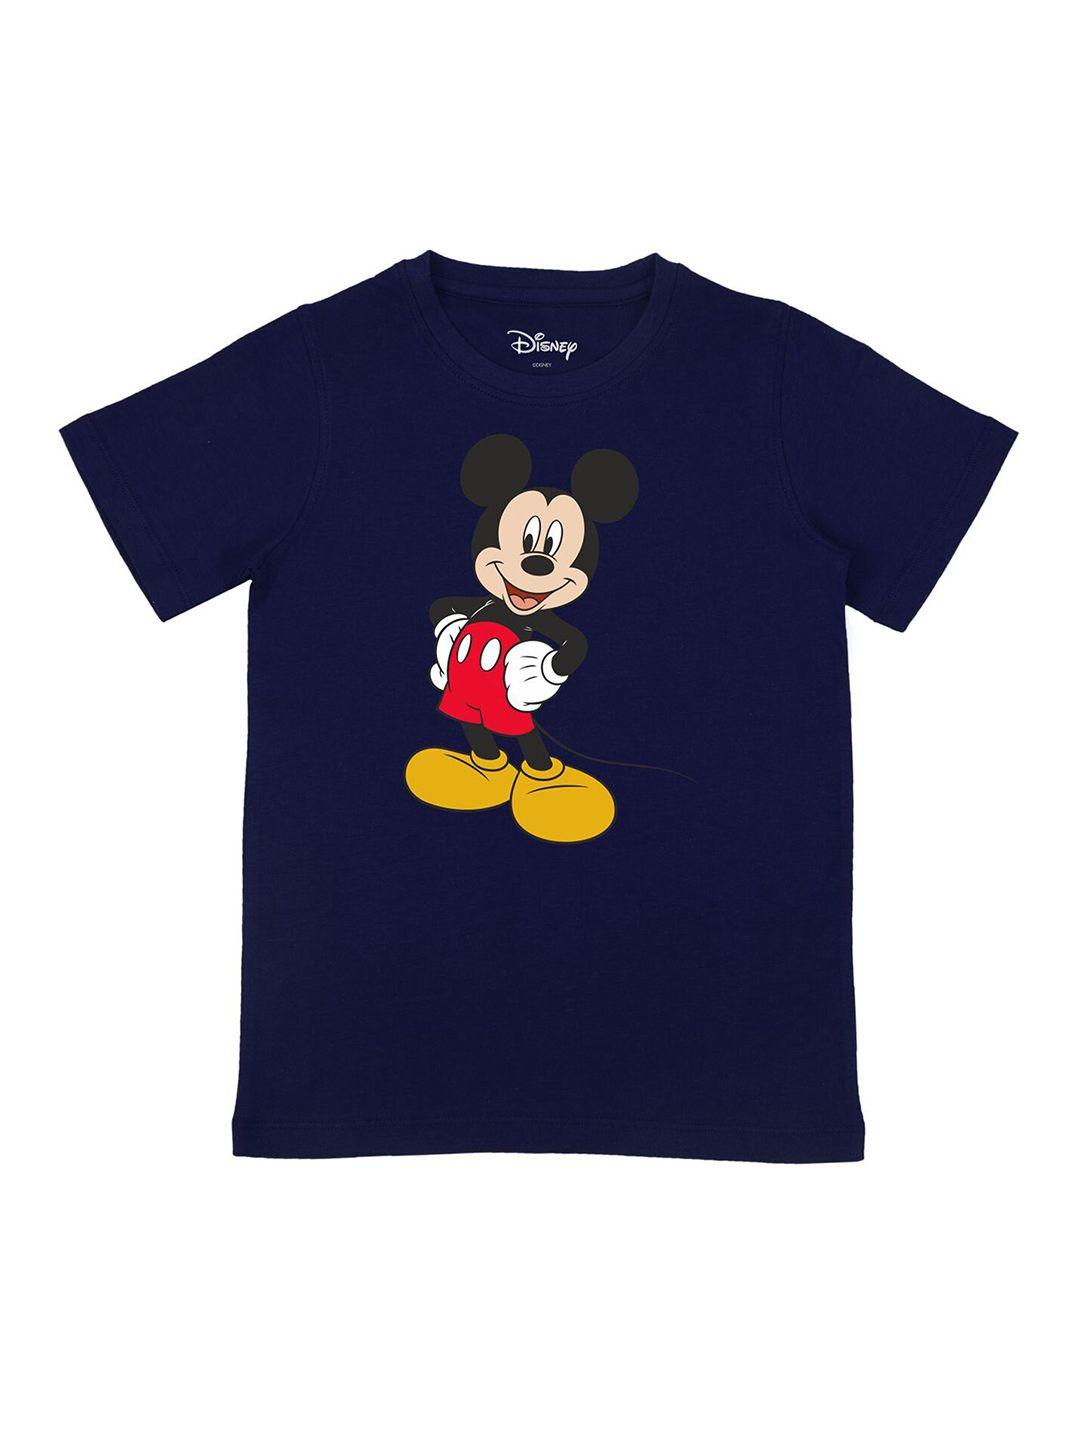 disney-by-wear-your-mind-boys-navy-blue--black-mickey-mouse-printed-pure-cotton-t-shirt